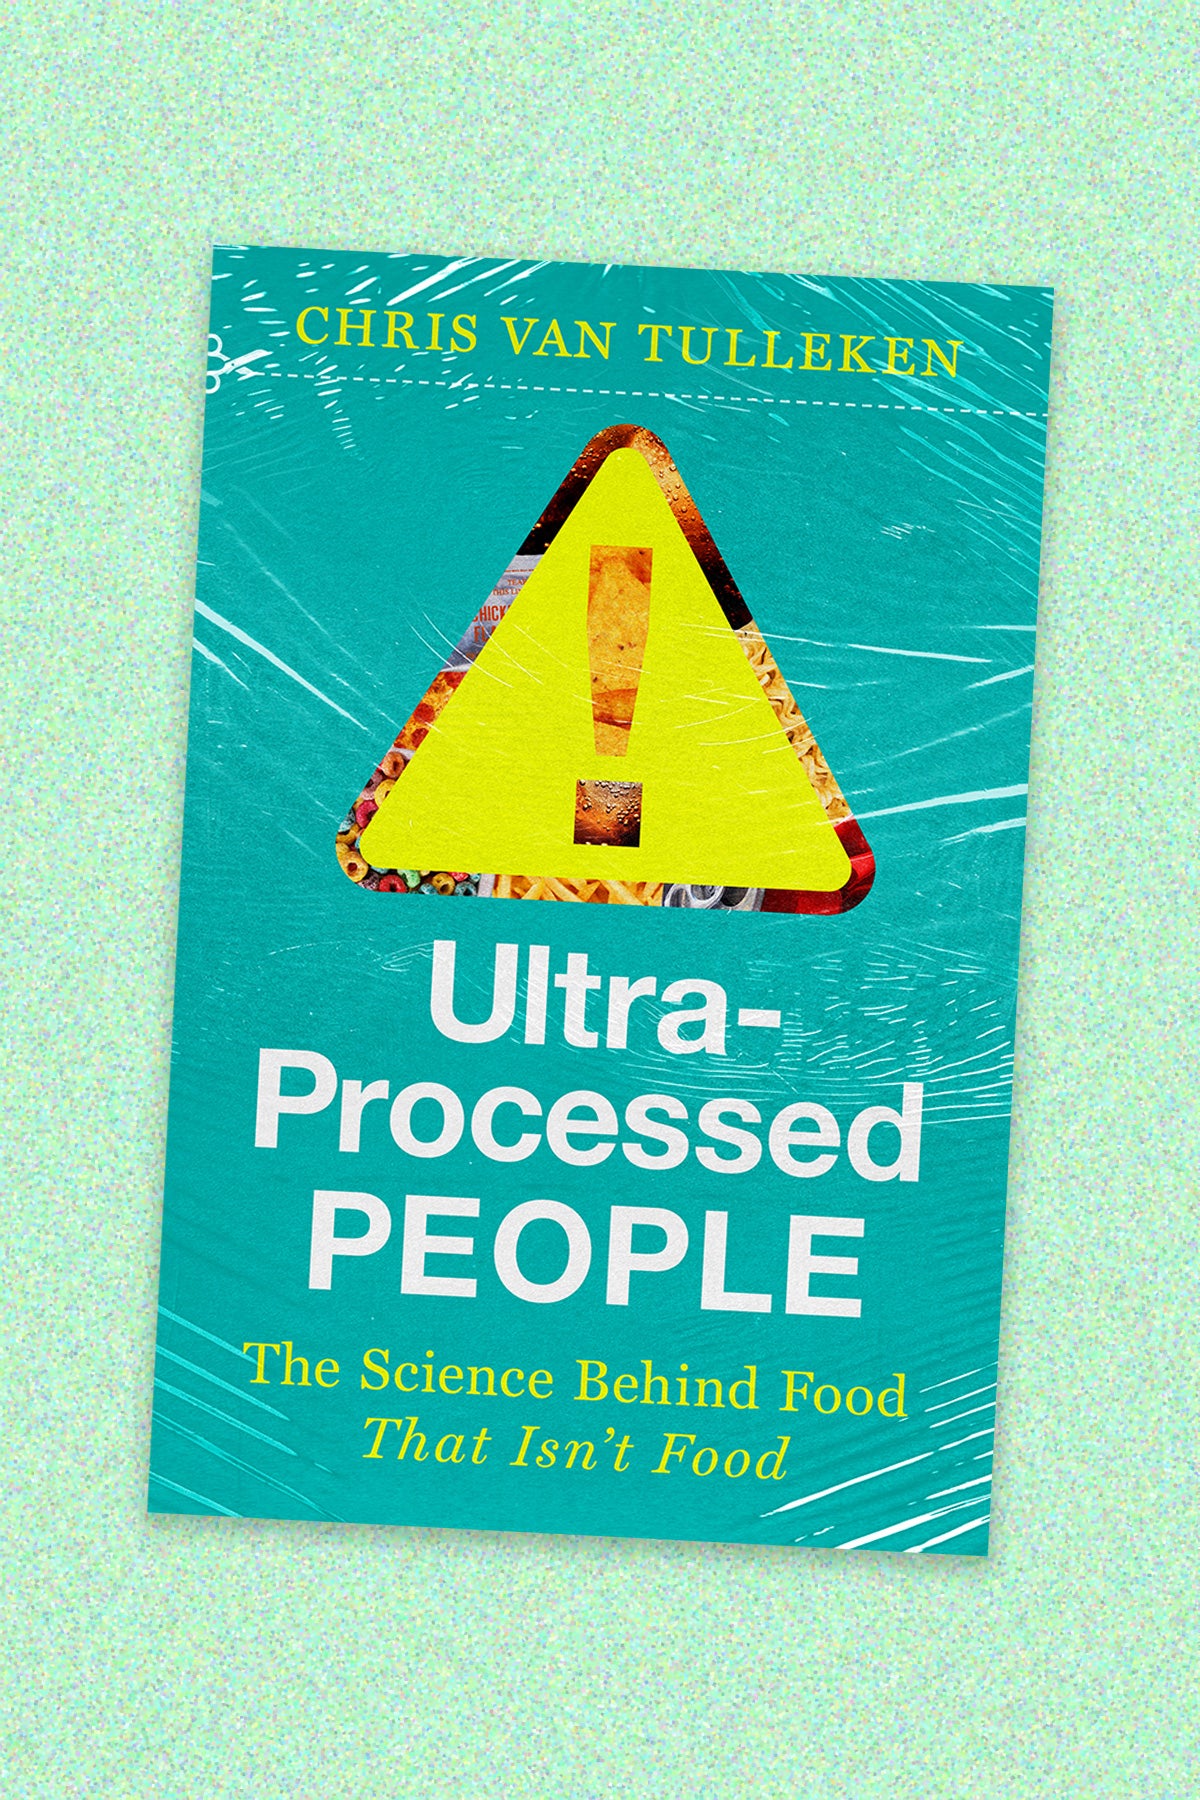 Why are ultra-processed foods so bad? New book has answers